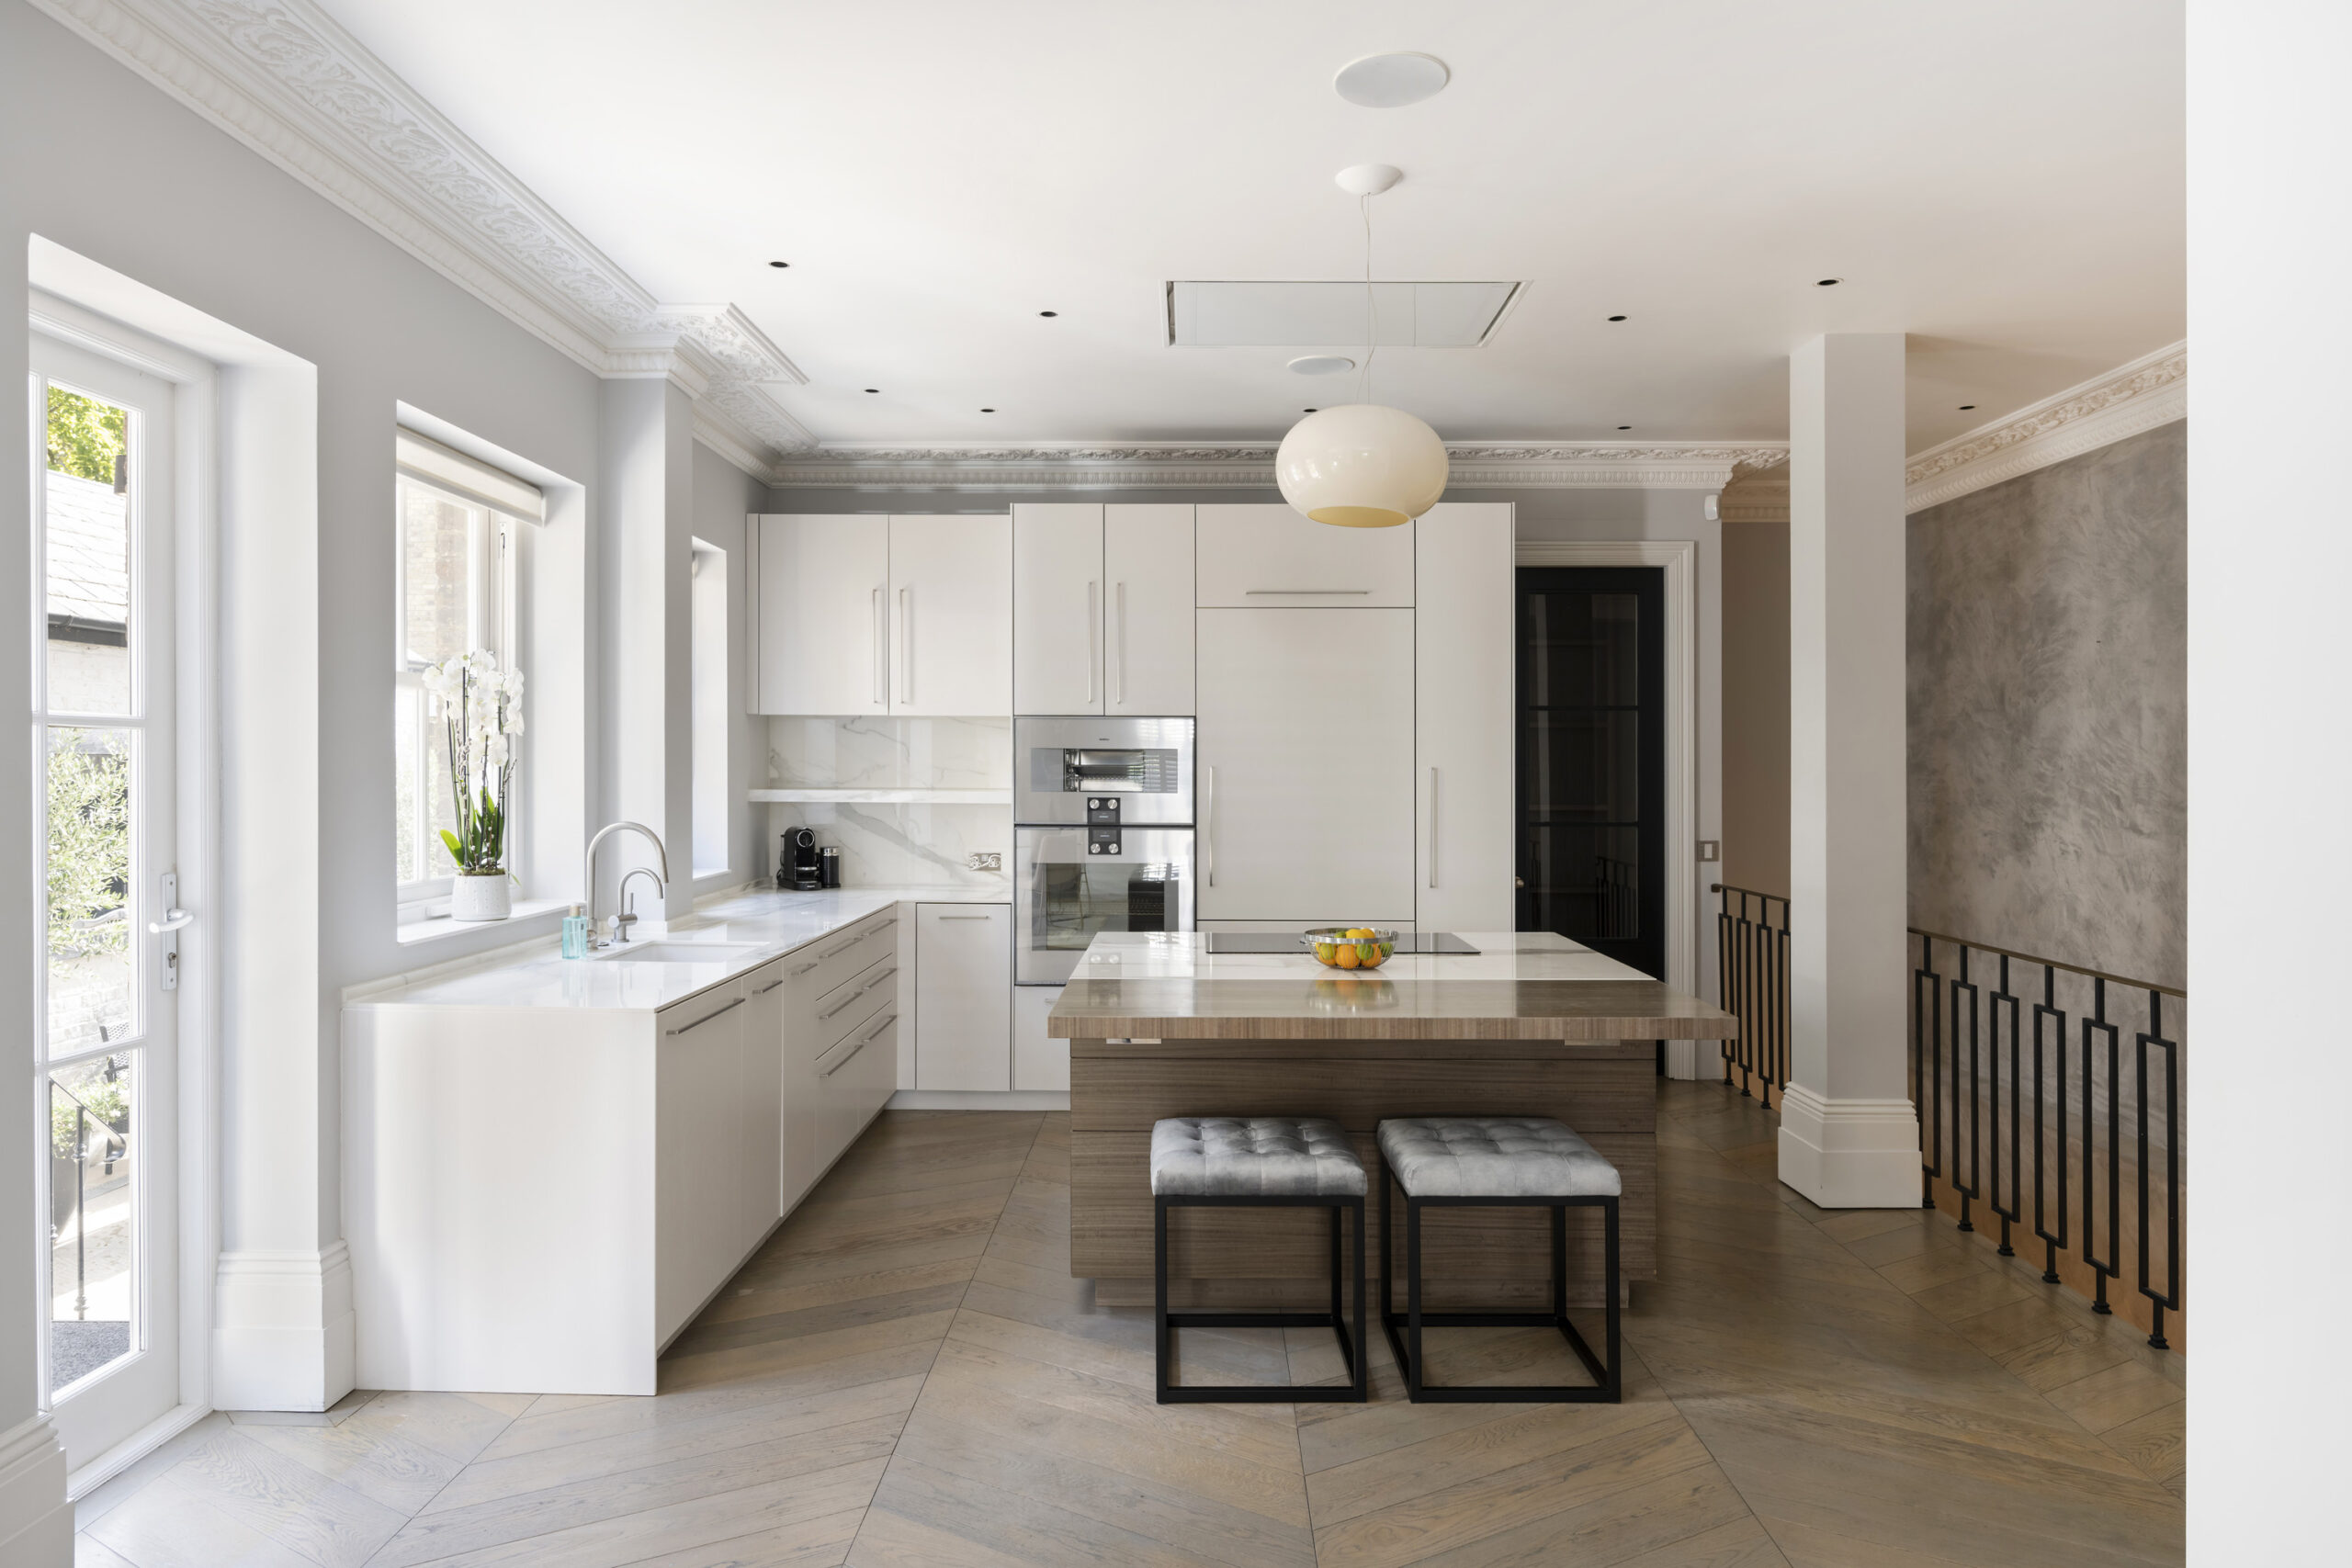 Modern open-plan kitchen of a luxurious Notting Hill home for sale